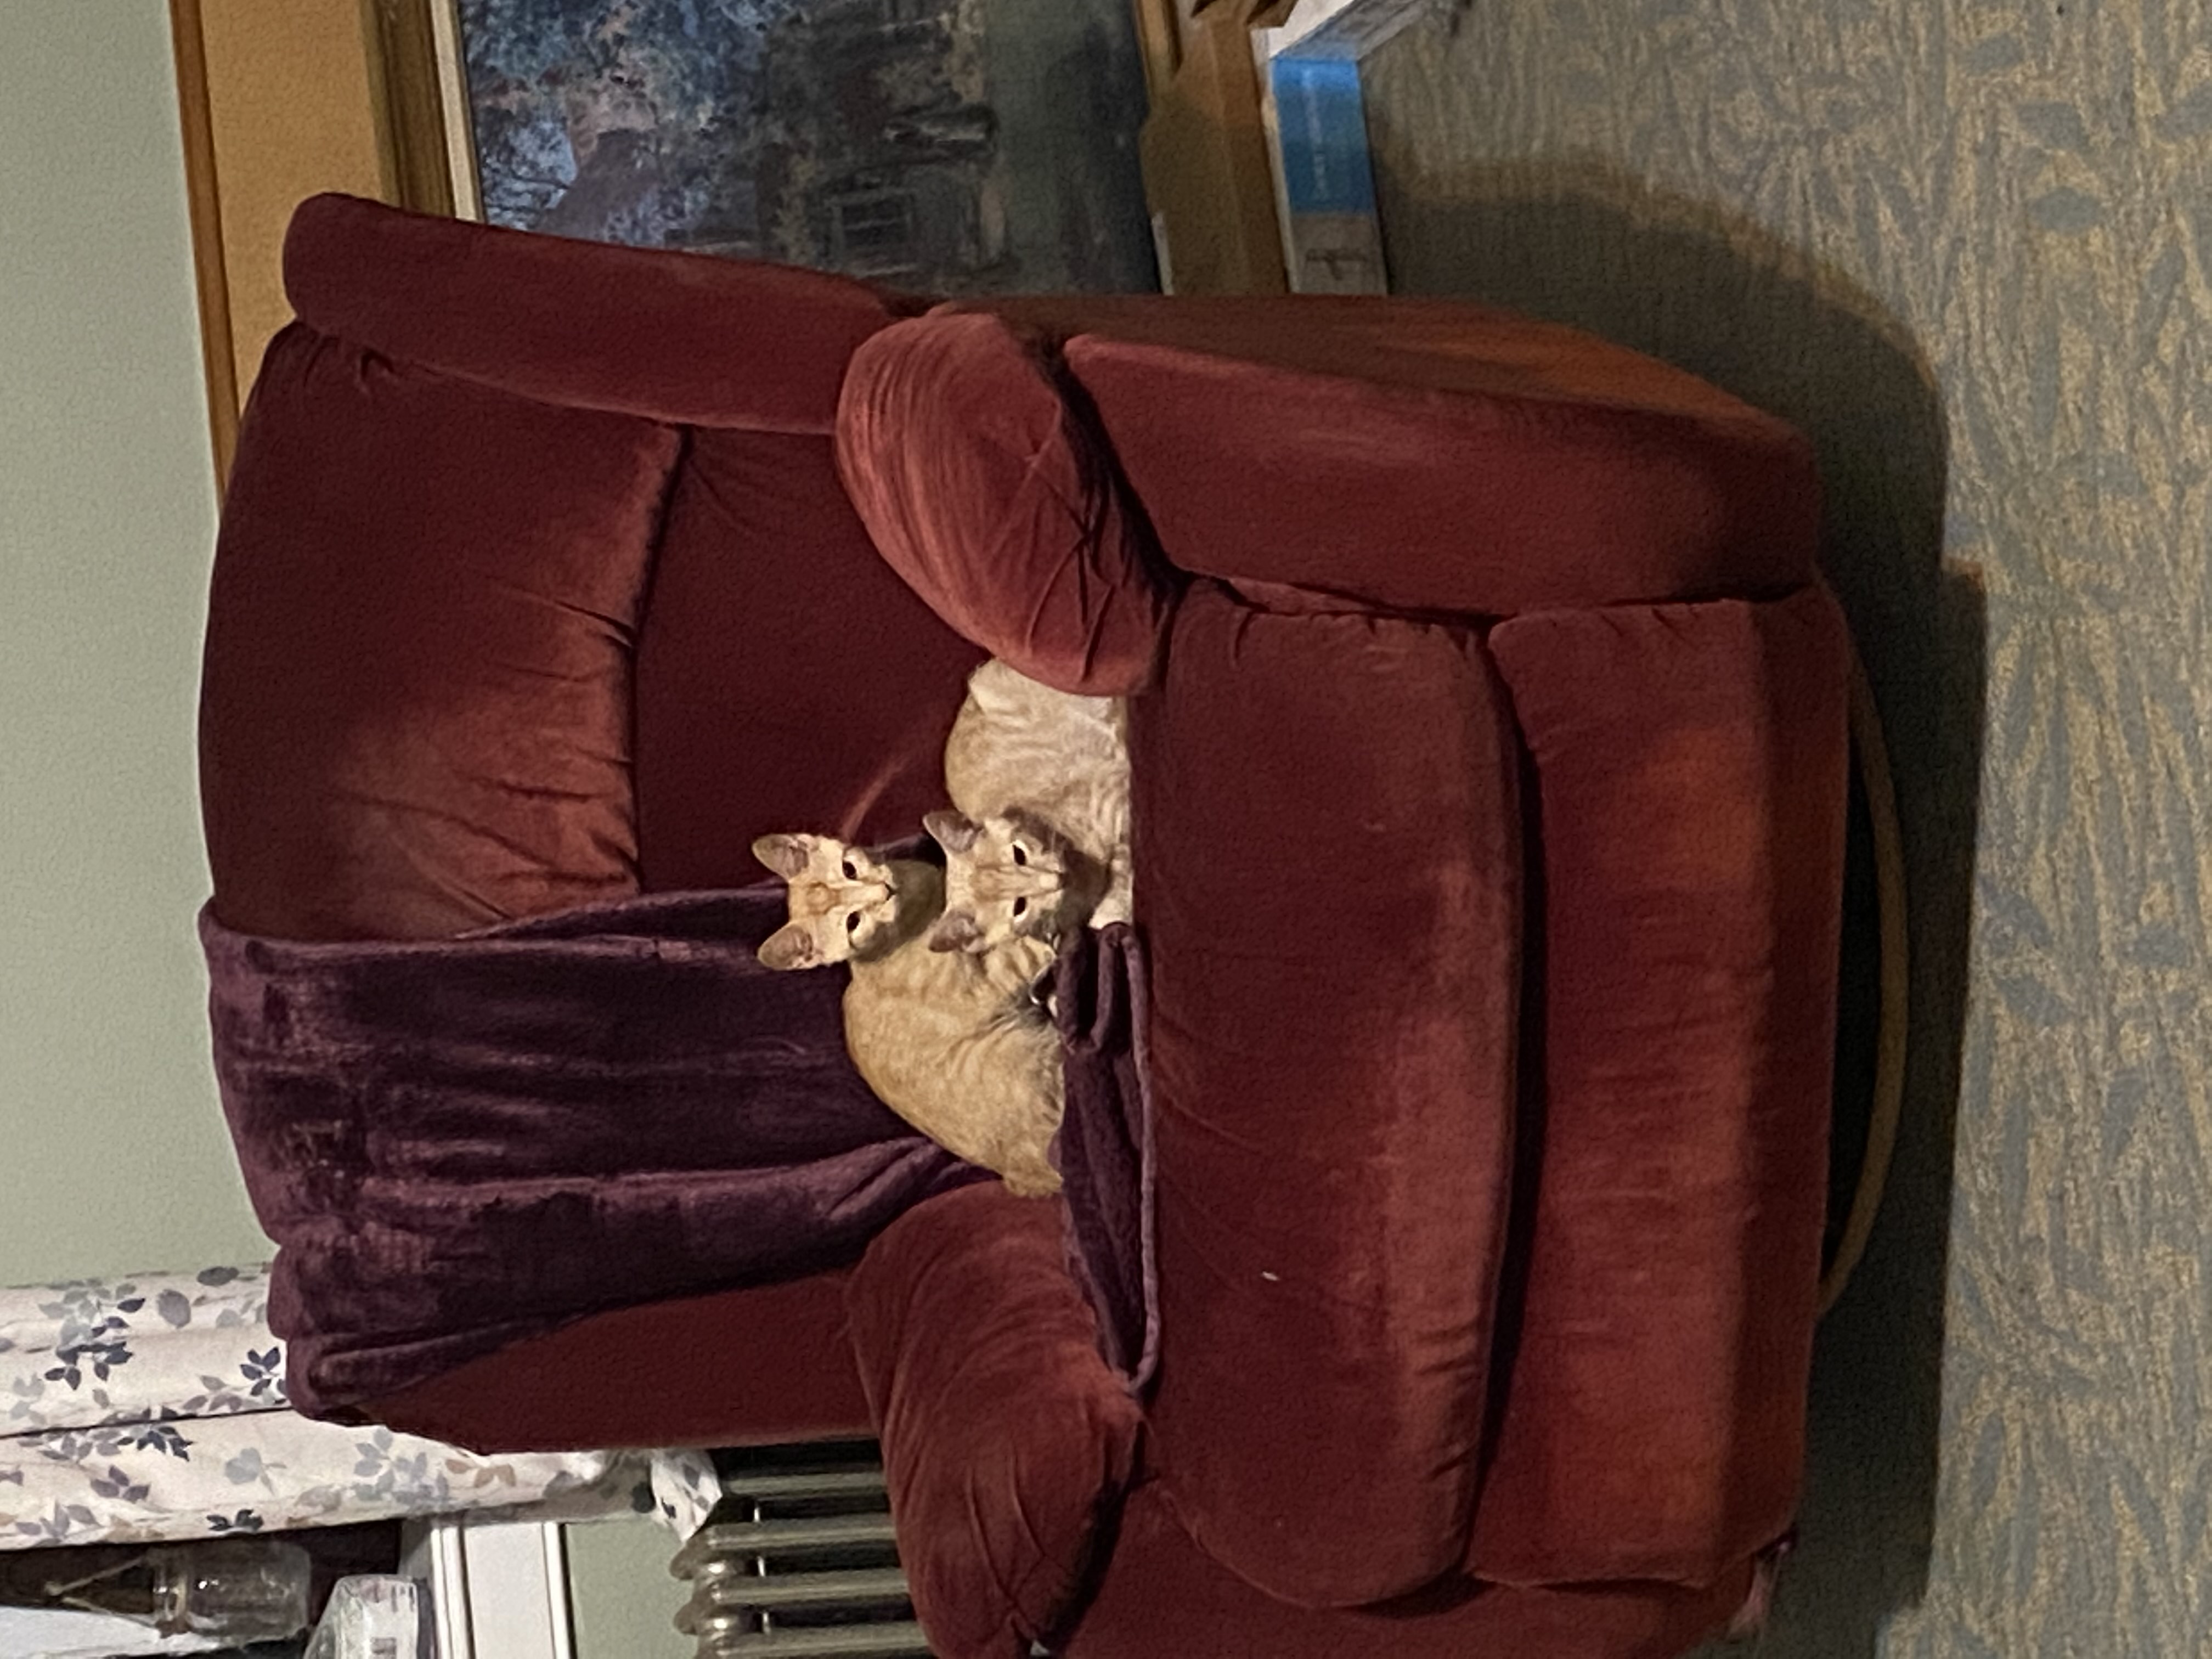 two orange kittens are crouched in a red armchair, looking at the camera